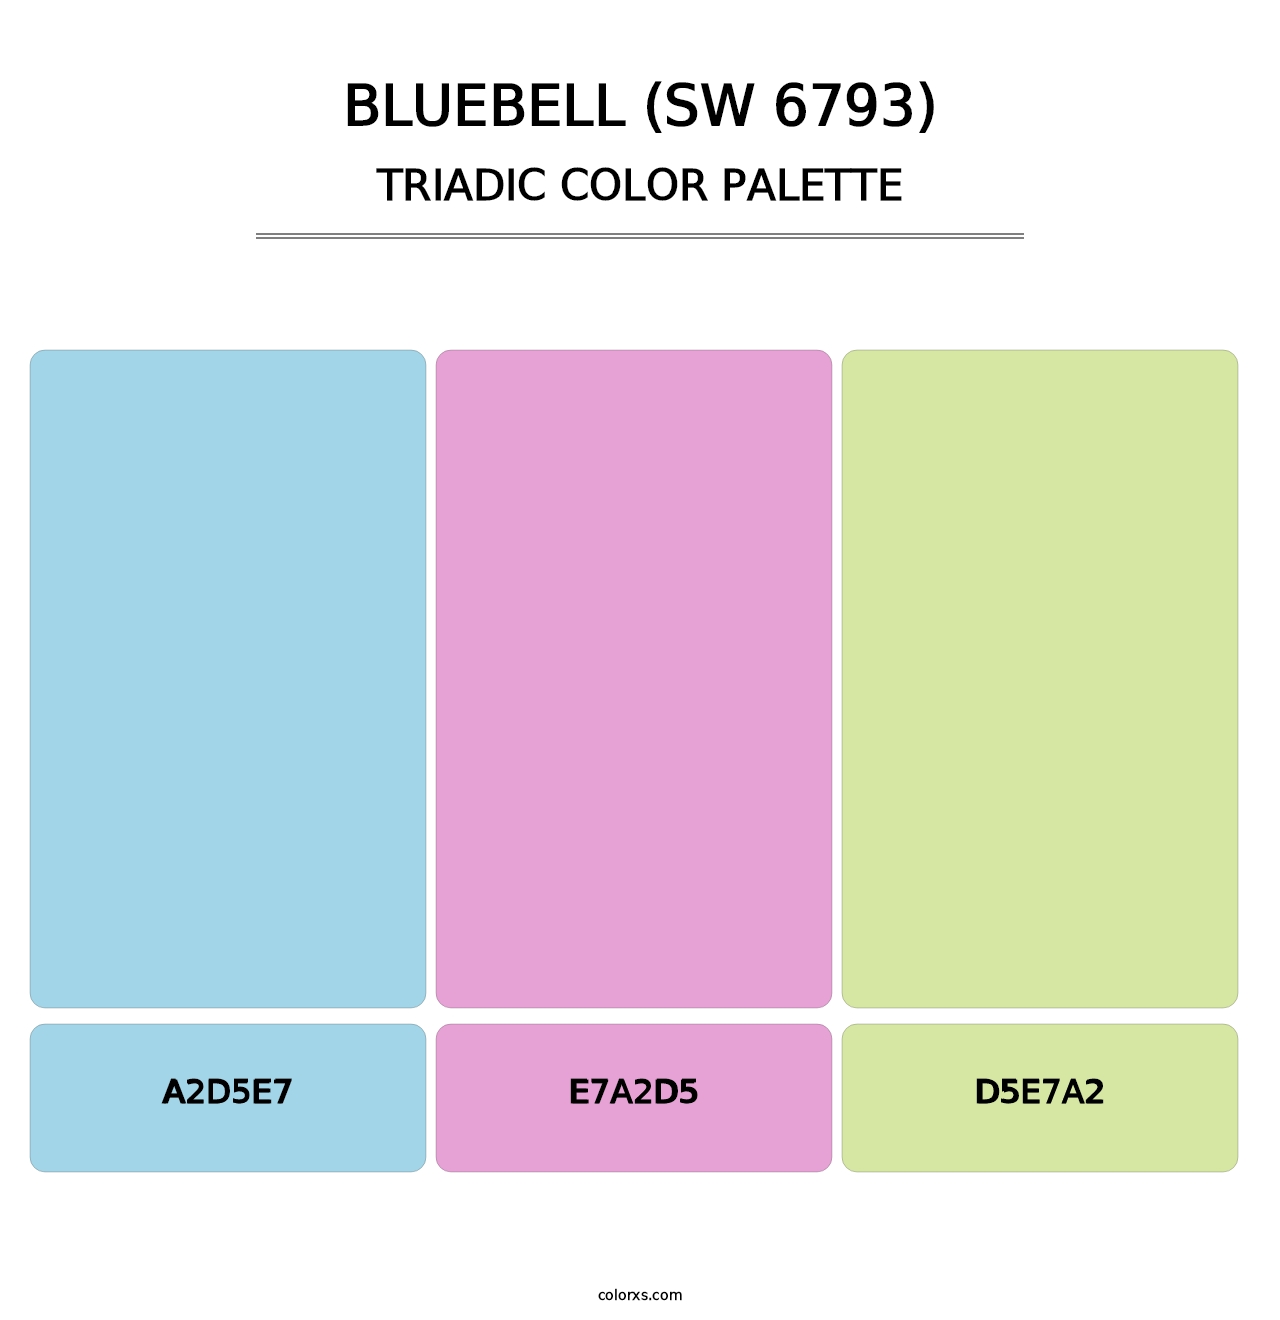 Bluebell (SW 6793) - Triadic Color Palette